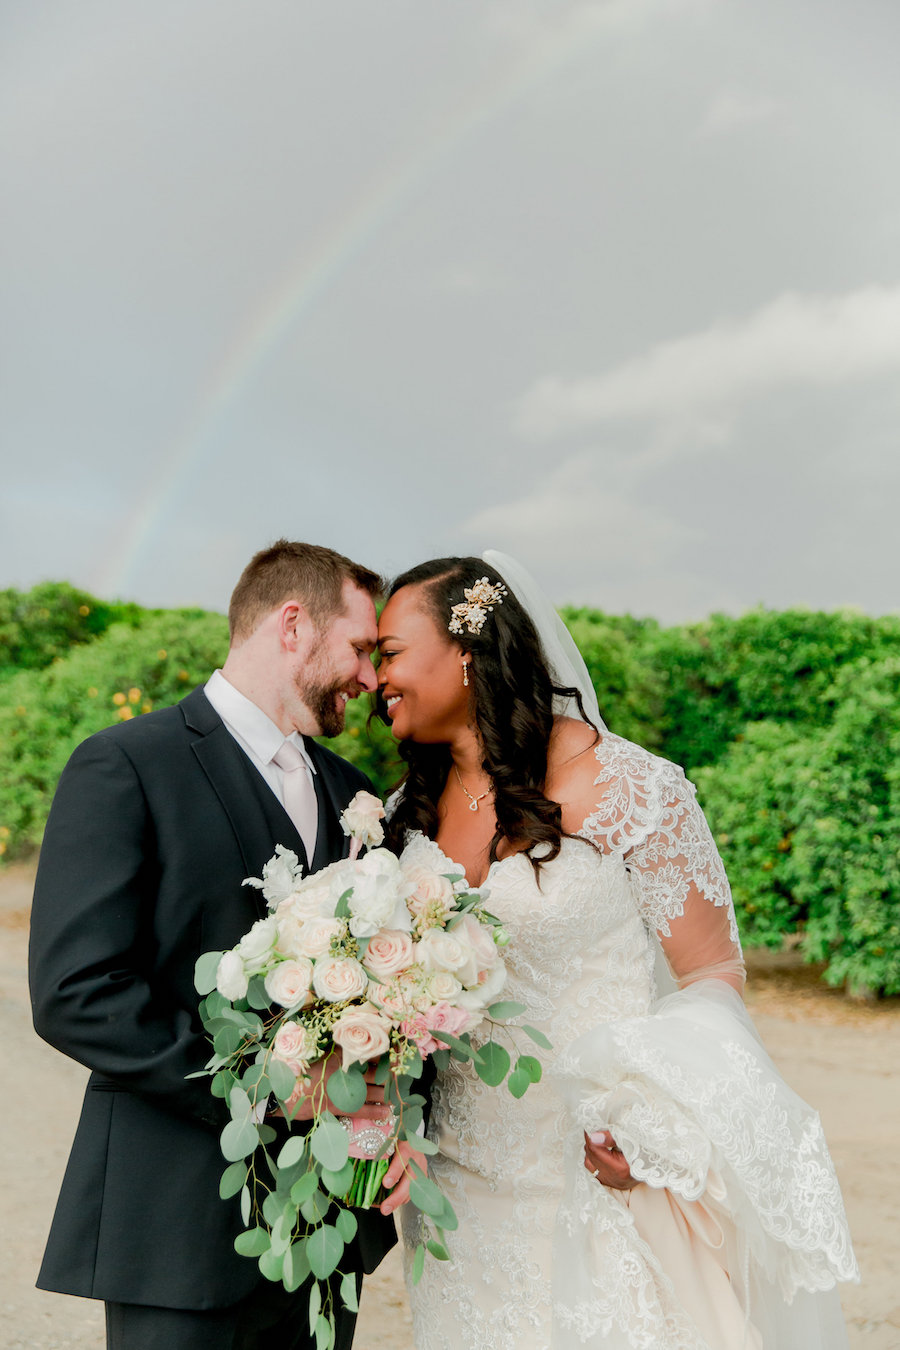 View More: http://michelleflores.pass.us/kristen-and-cole-clarke-wedding-2017